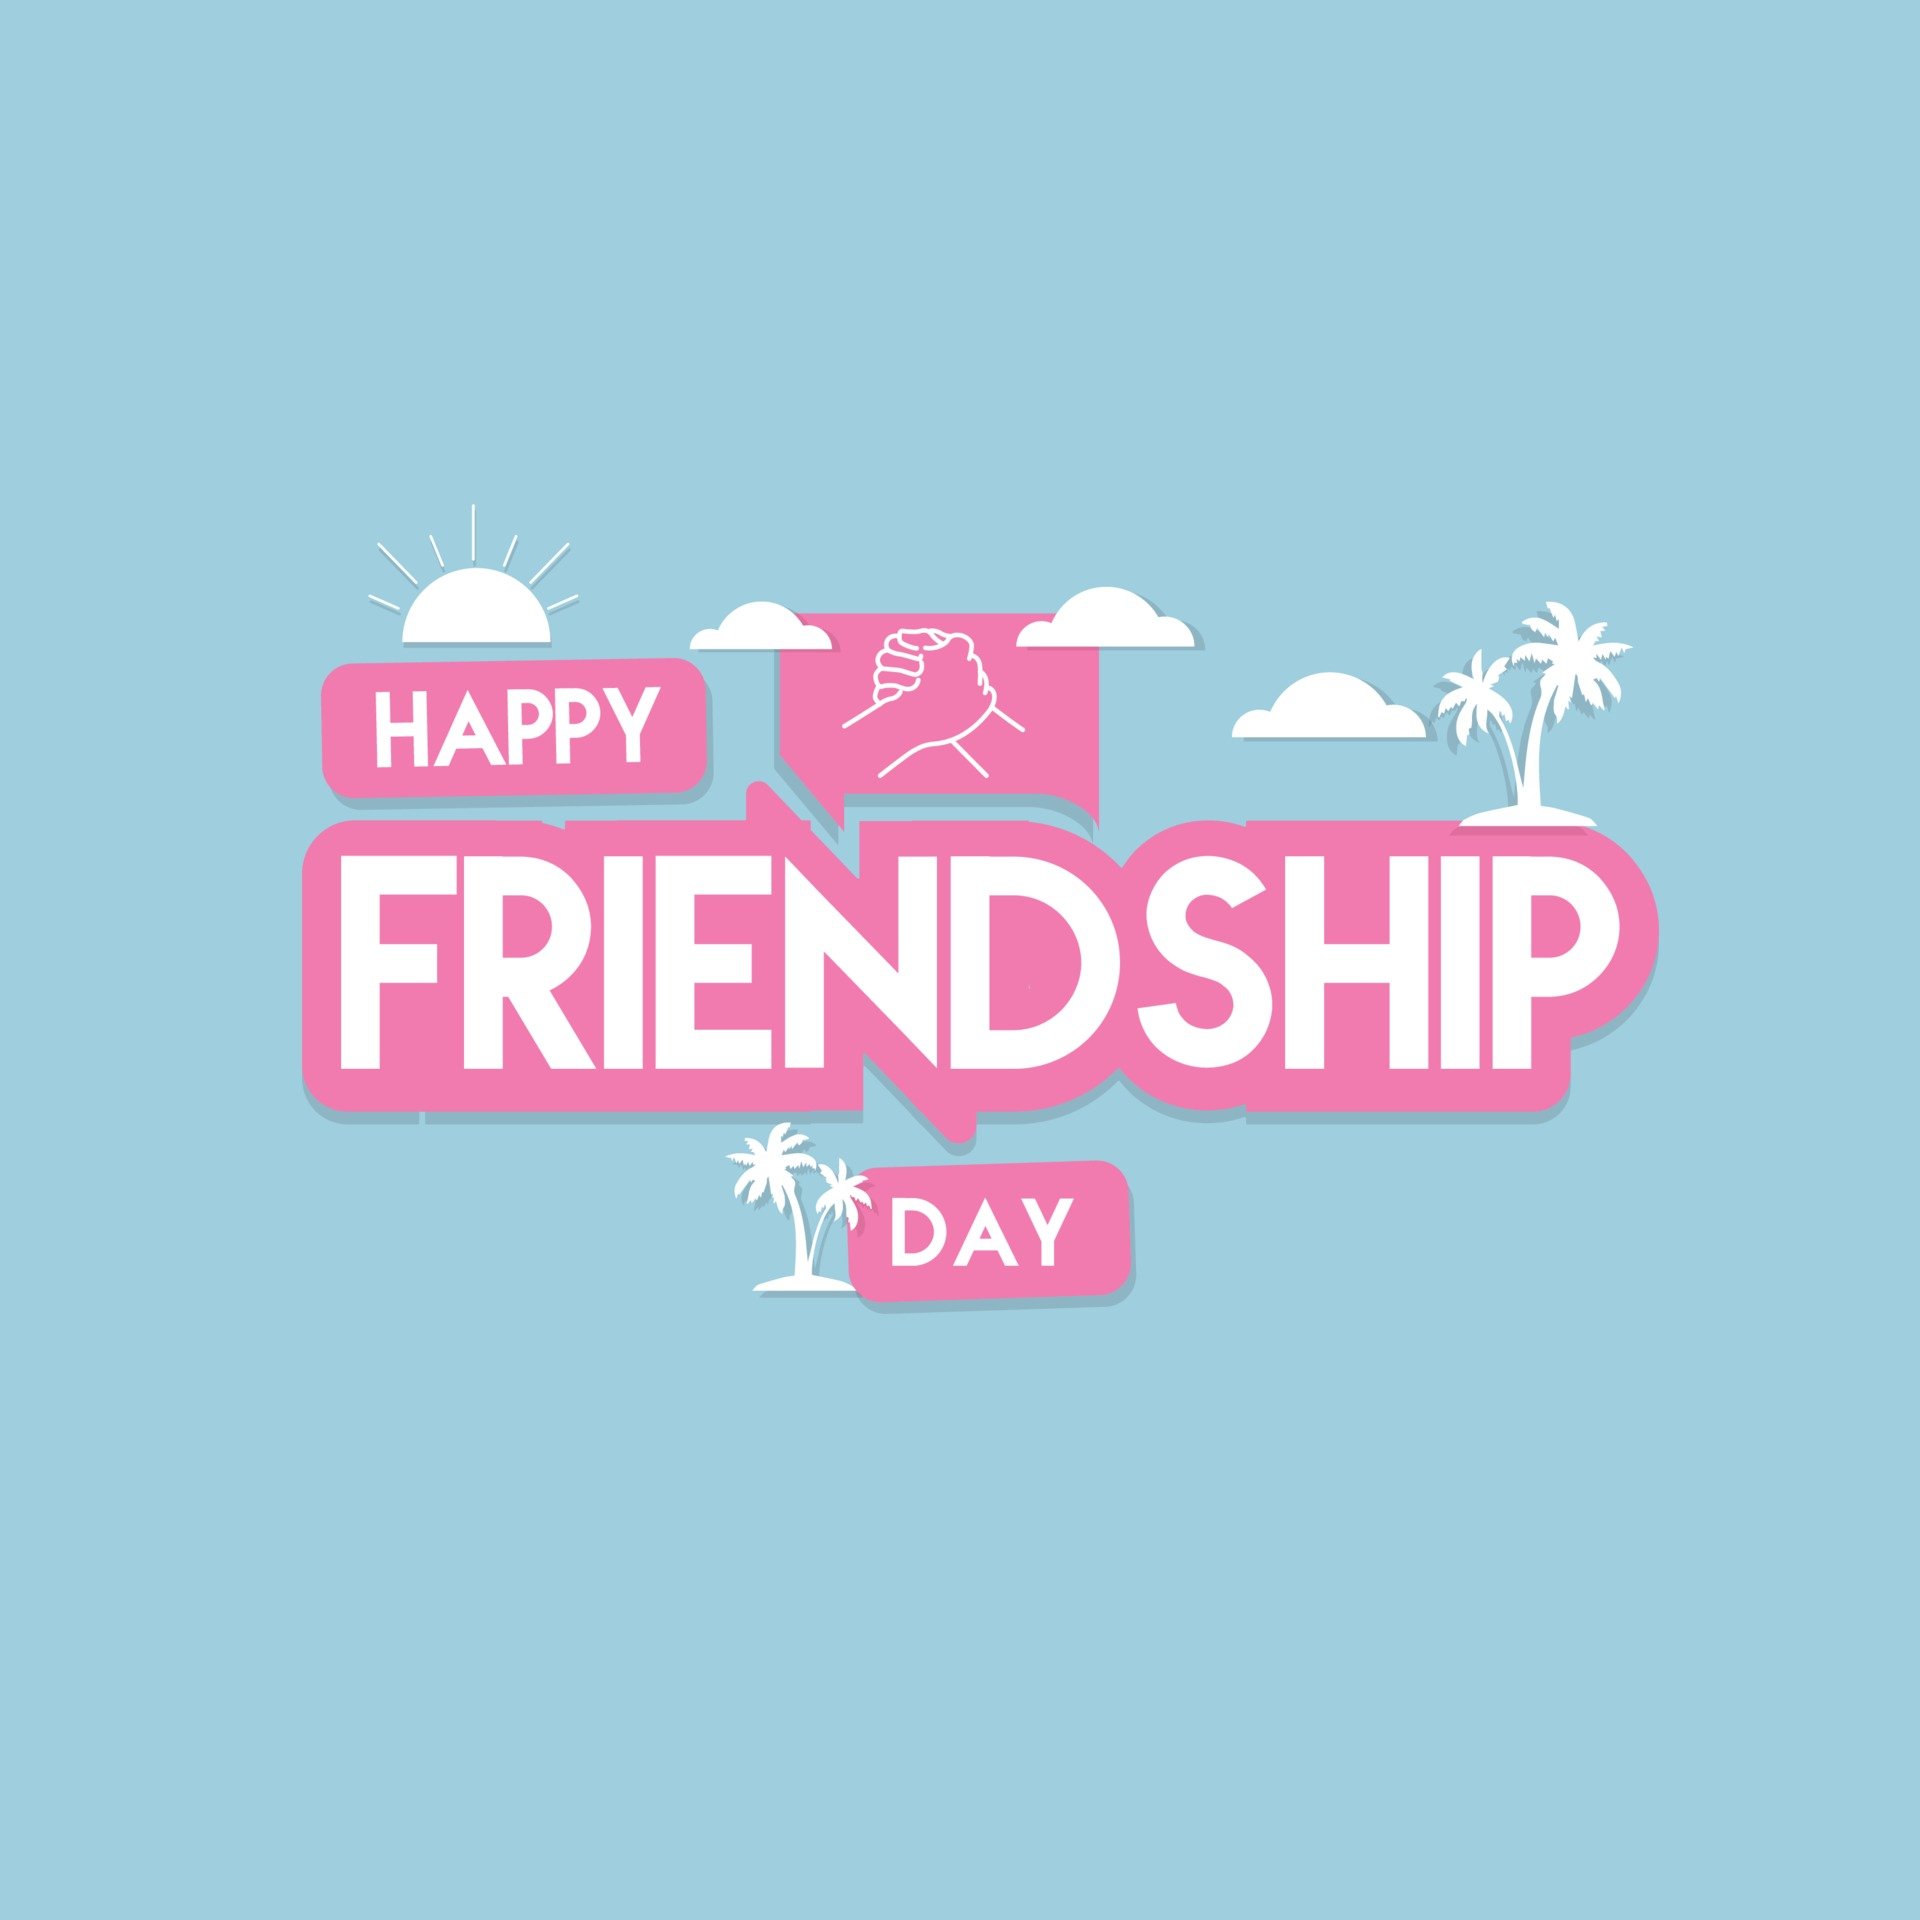 Happy friendship day and best friend wallpaper and greeting card